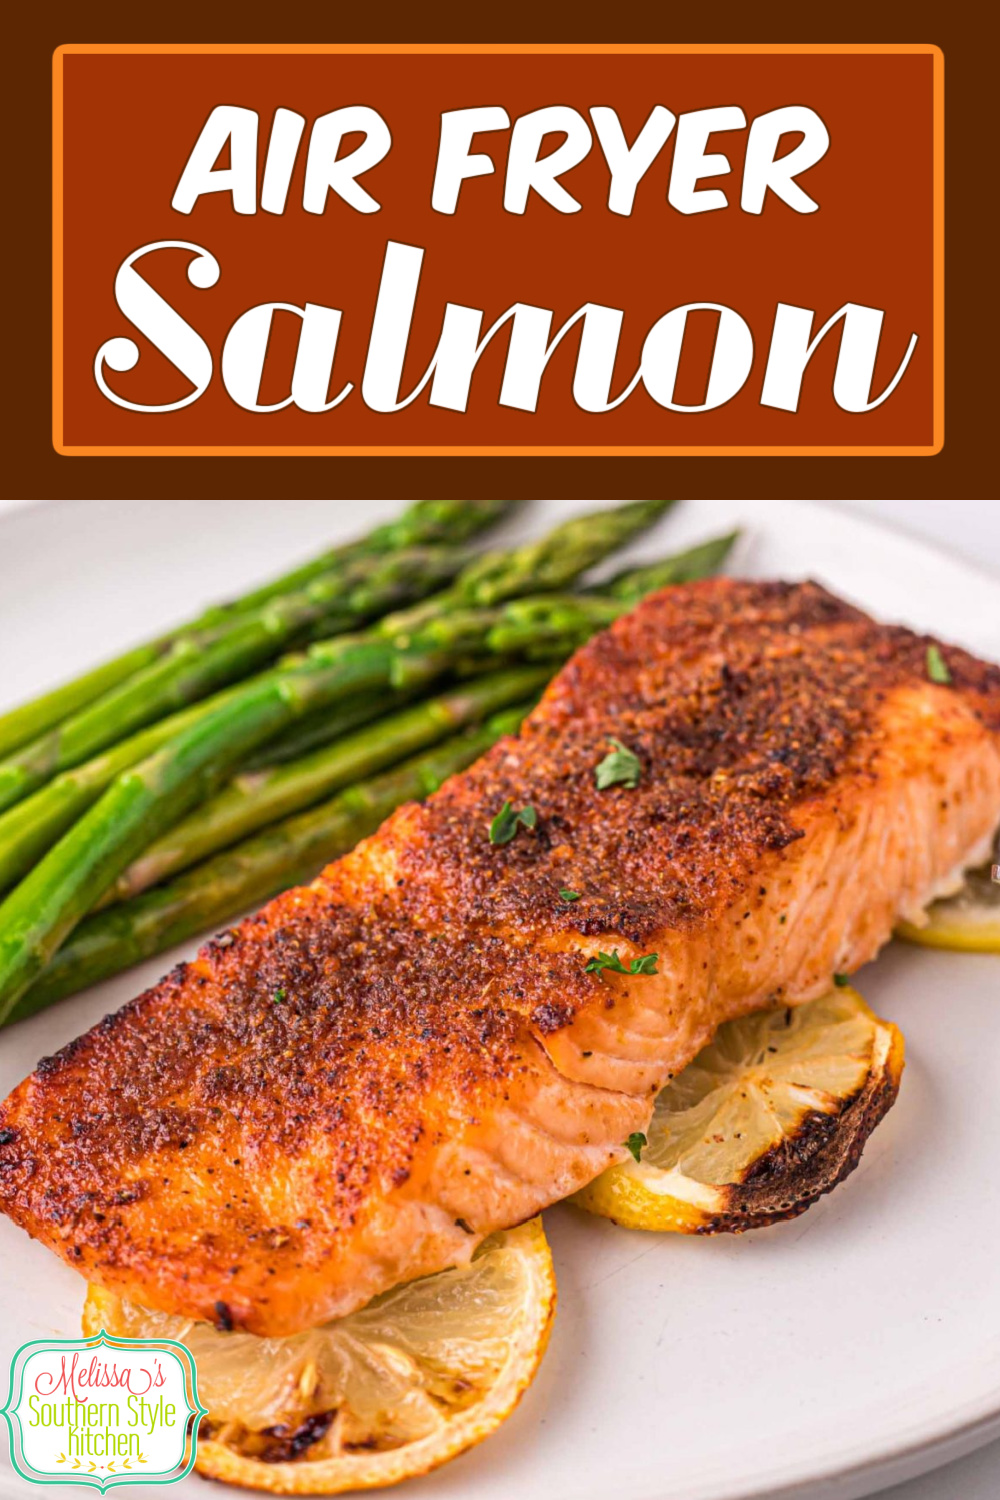 This Cajun Seasoned Air Fryer Salmon features hints of lemon that complements the salmon and keeps the flavor light and fresh #salmonrecipes #airfryerrecipes #airfryersalmon #creolesalmon #cajunsalmon #seafoodrecipes #southernstyle #southernrecipes via @melissasssk